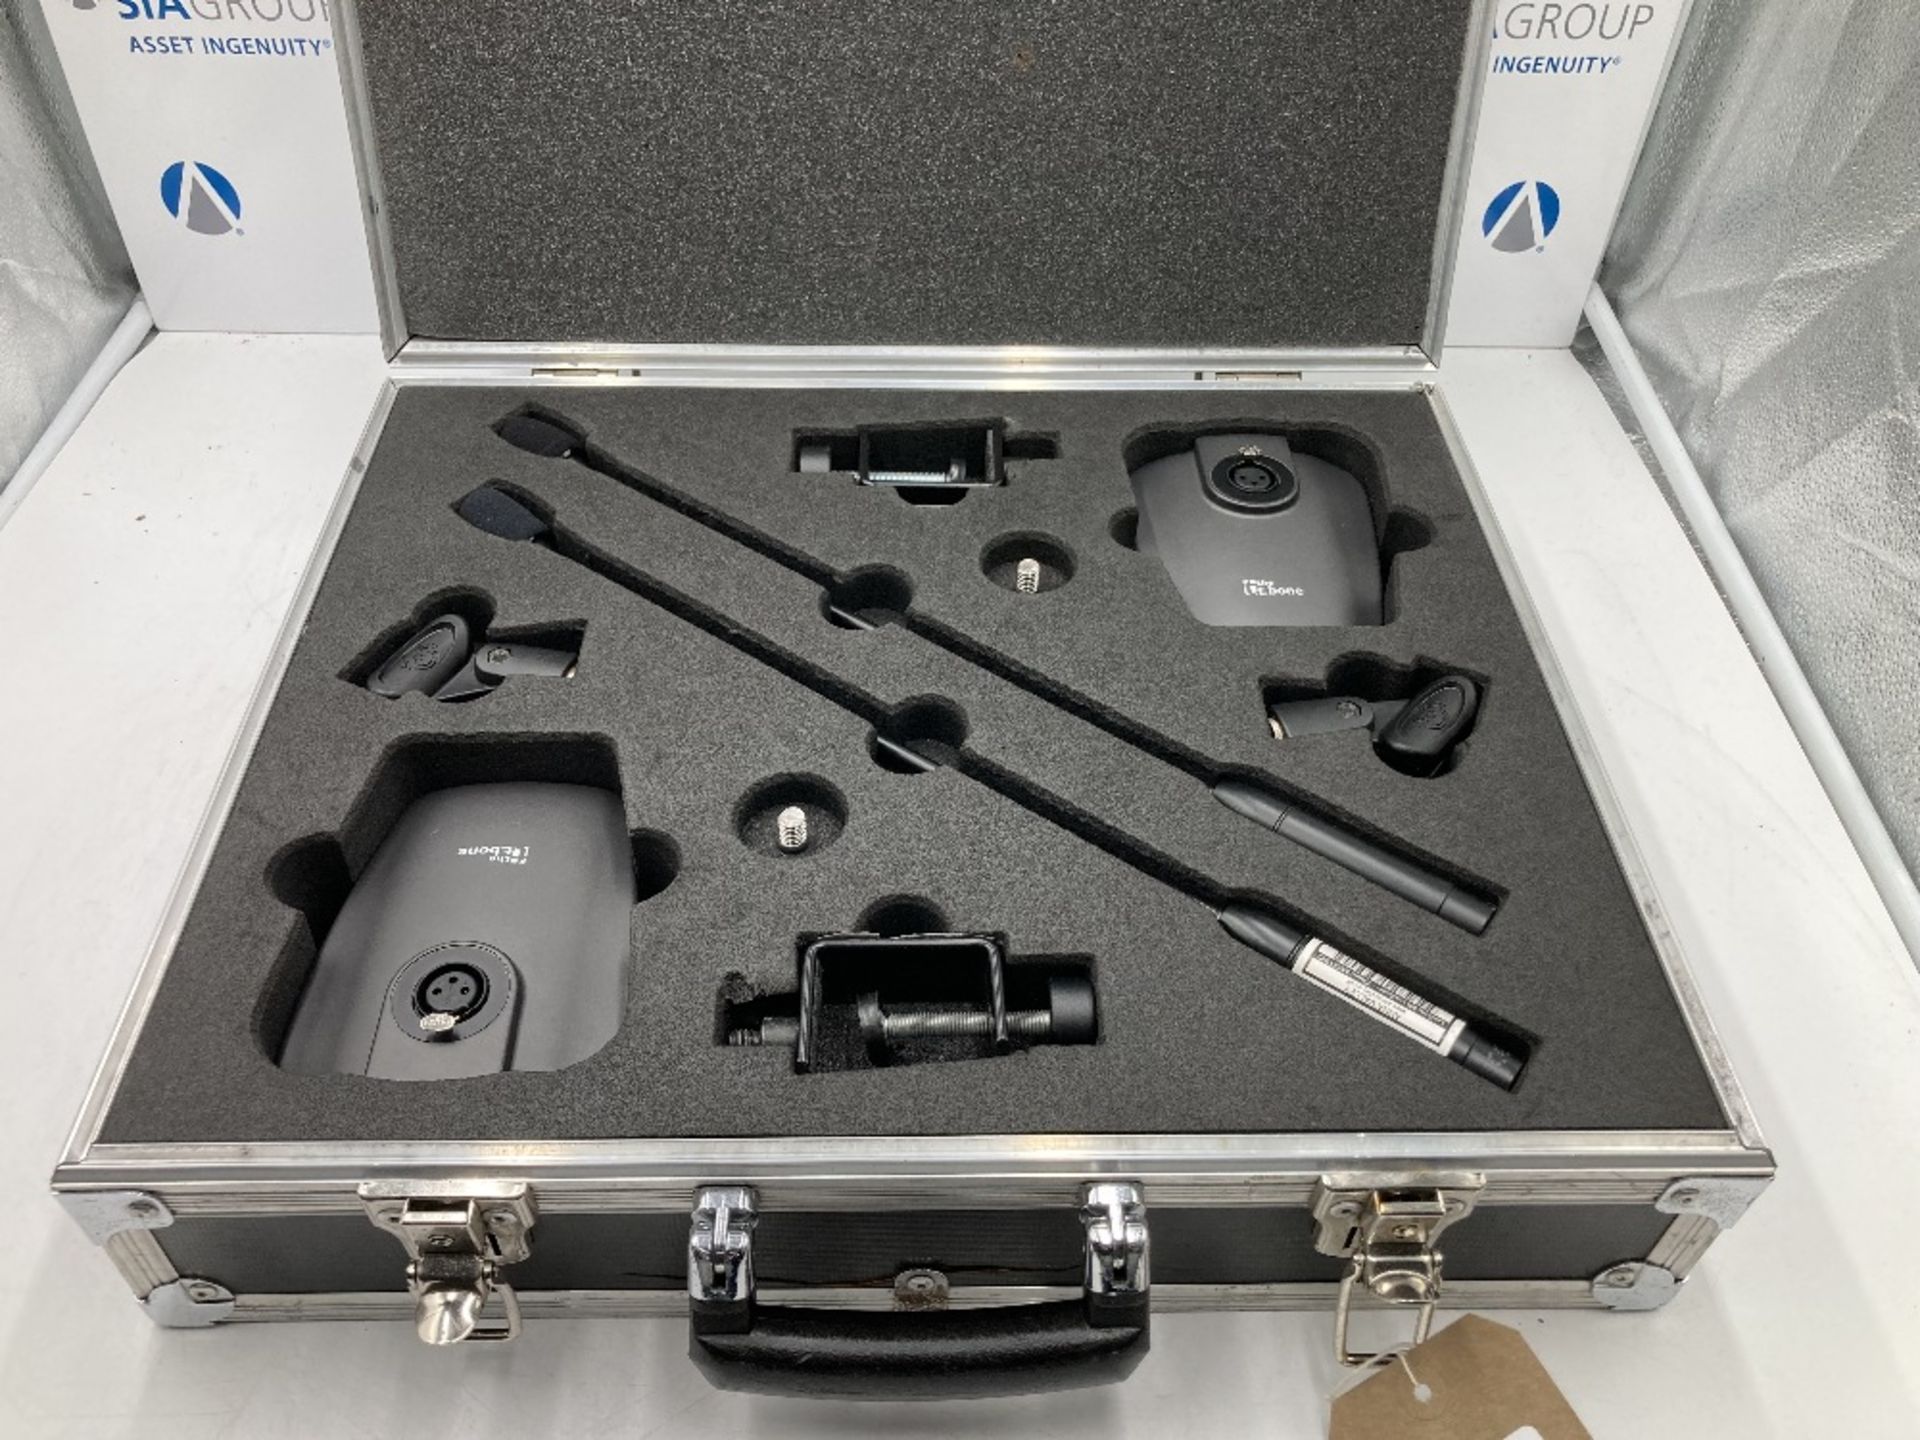 Shure MX418 Lecturn Kit & Heavy Duty Case - Image 2 of 6